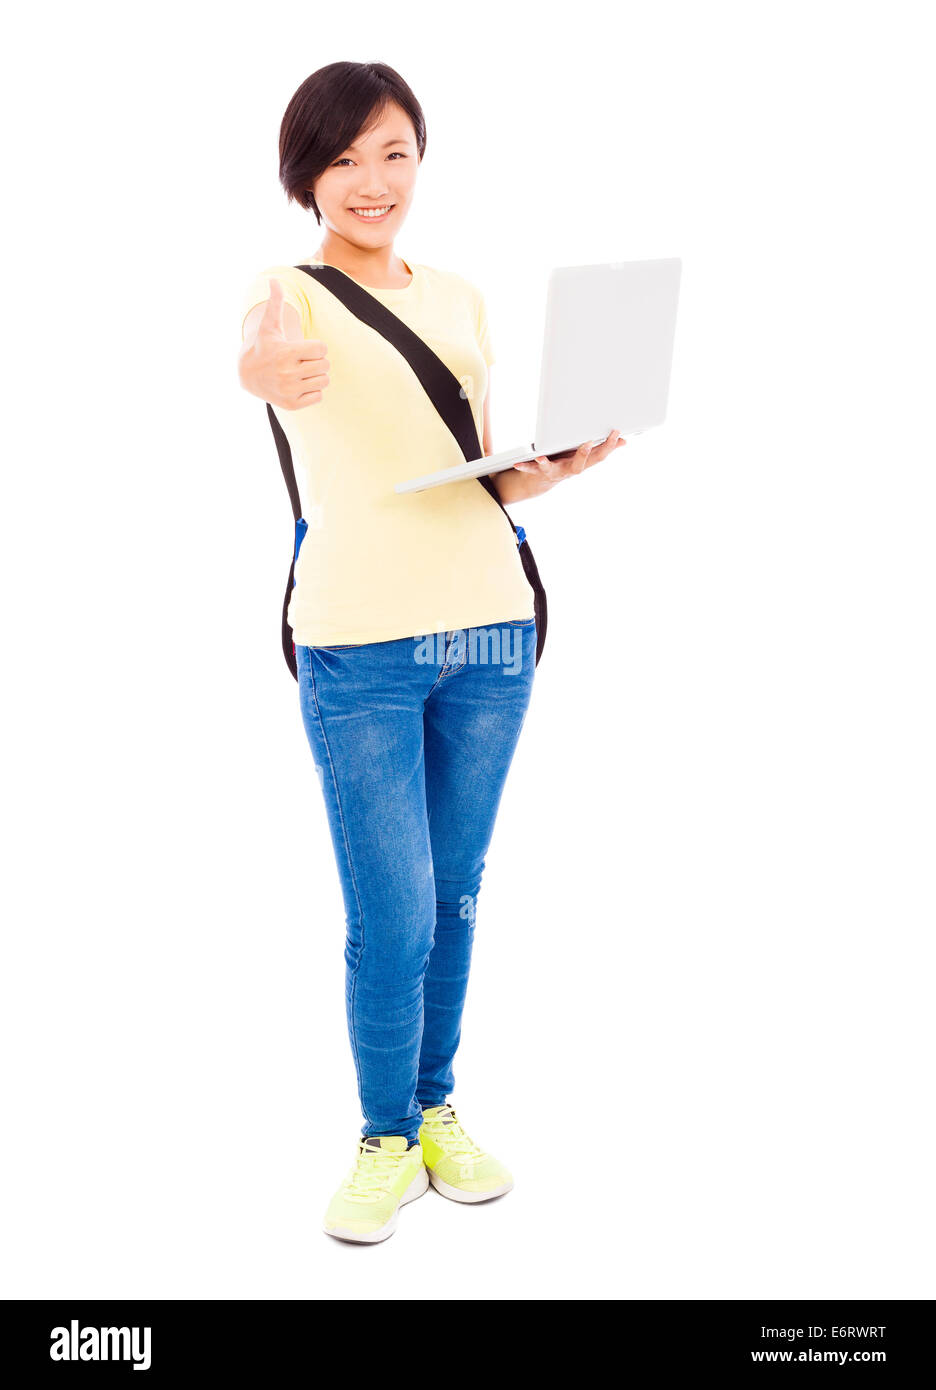 Smiling young woman holding a laptop and thumb up Stock Photo